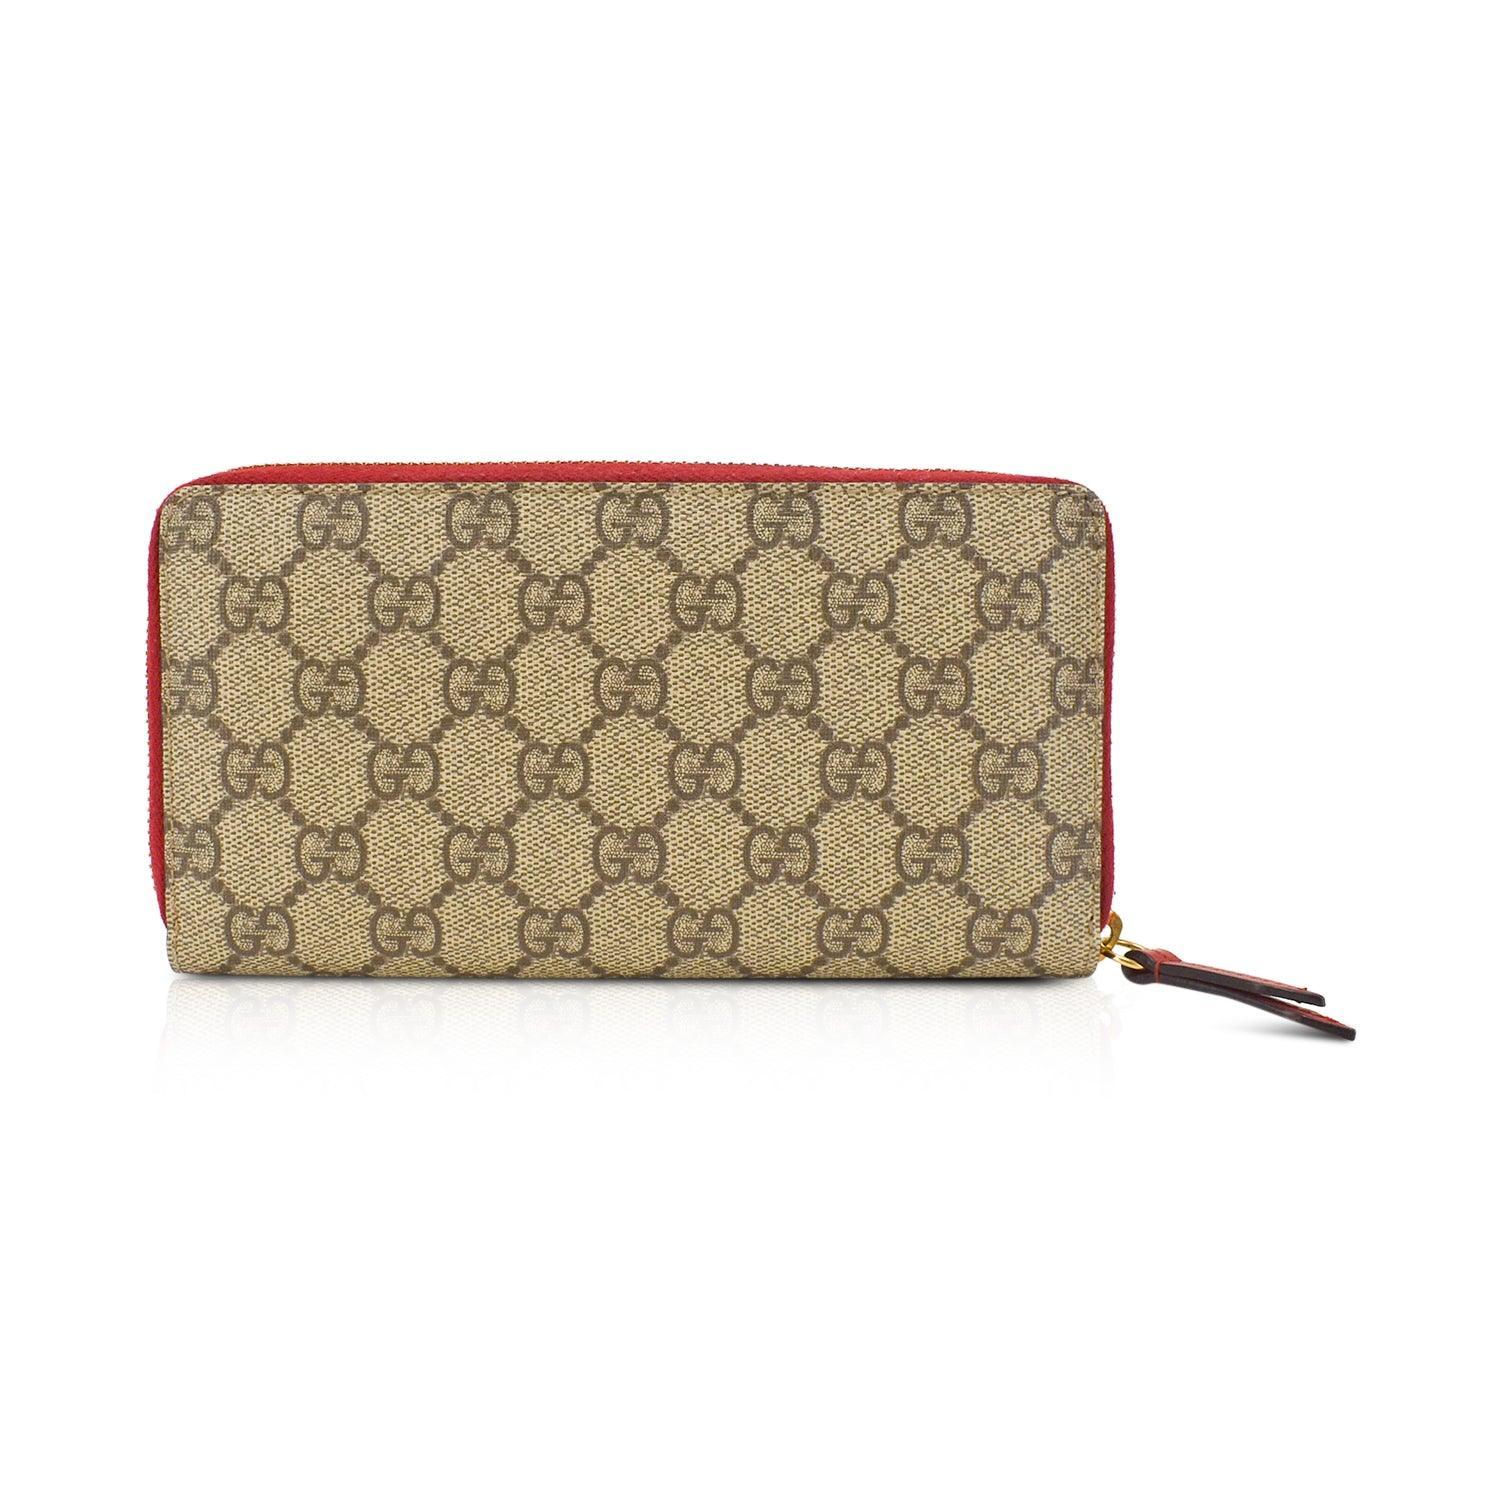 Gucci 'Love' Continental Wallet - Fashionably Yours